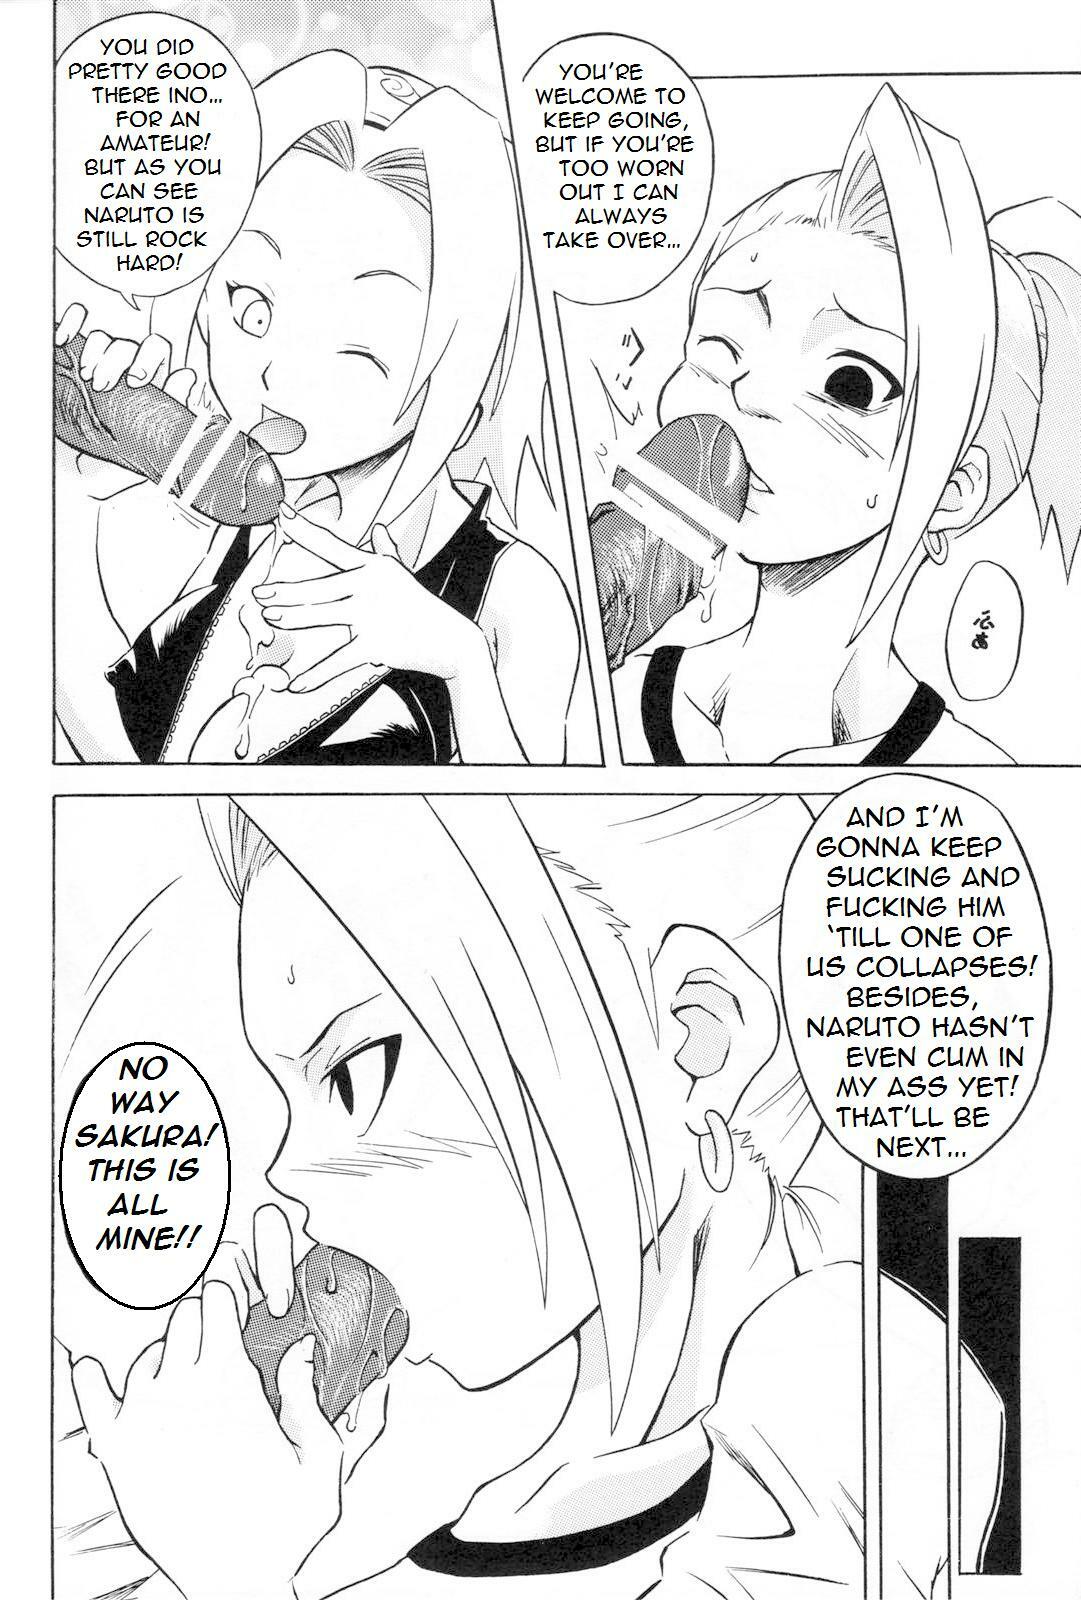 Ino Gets Used [English] [Rewrite] [Bolt] page 10 full